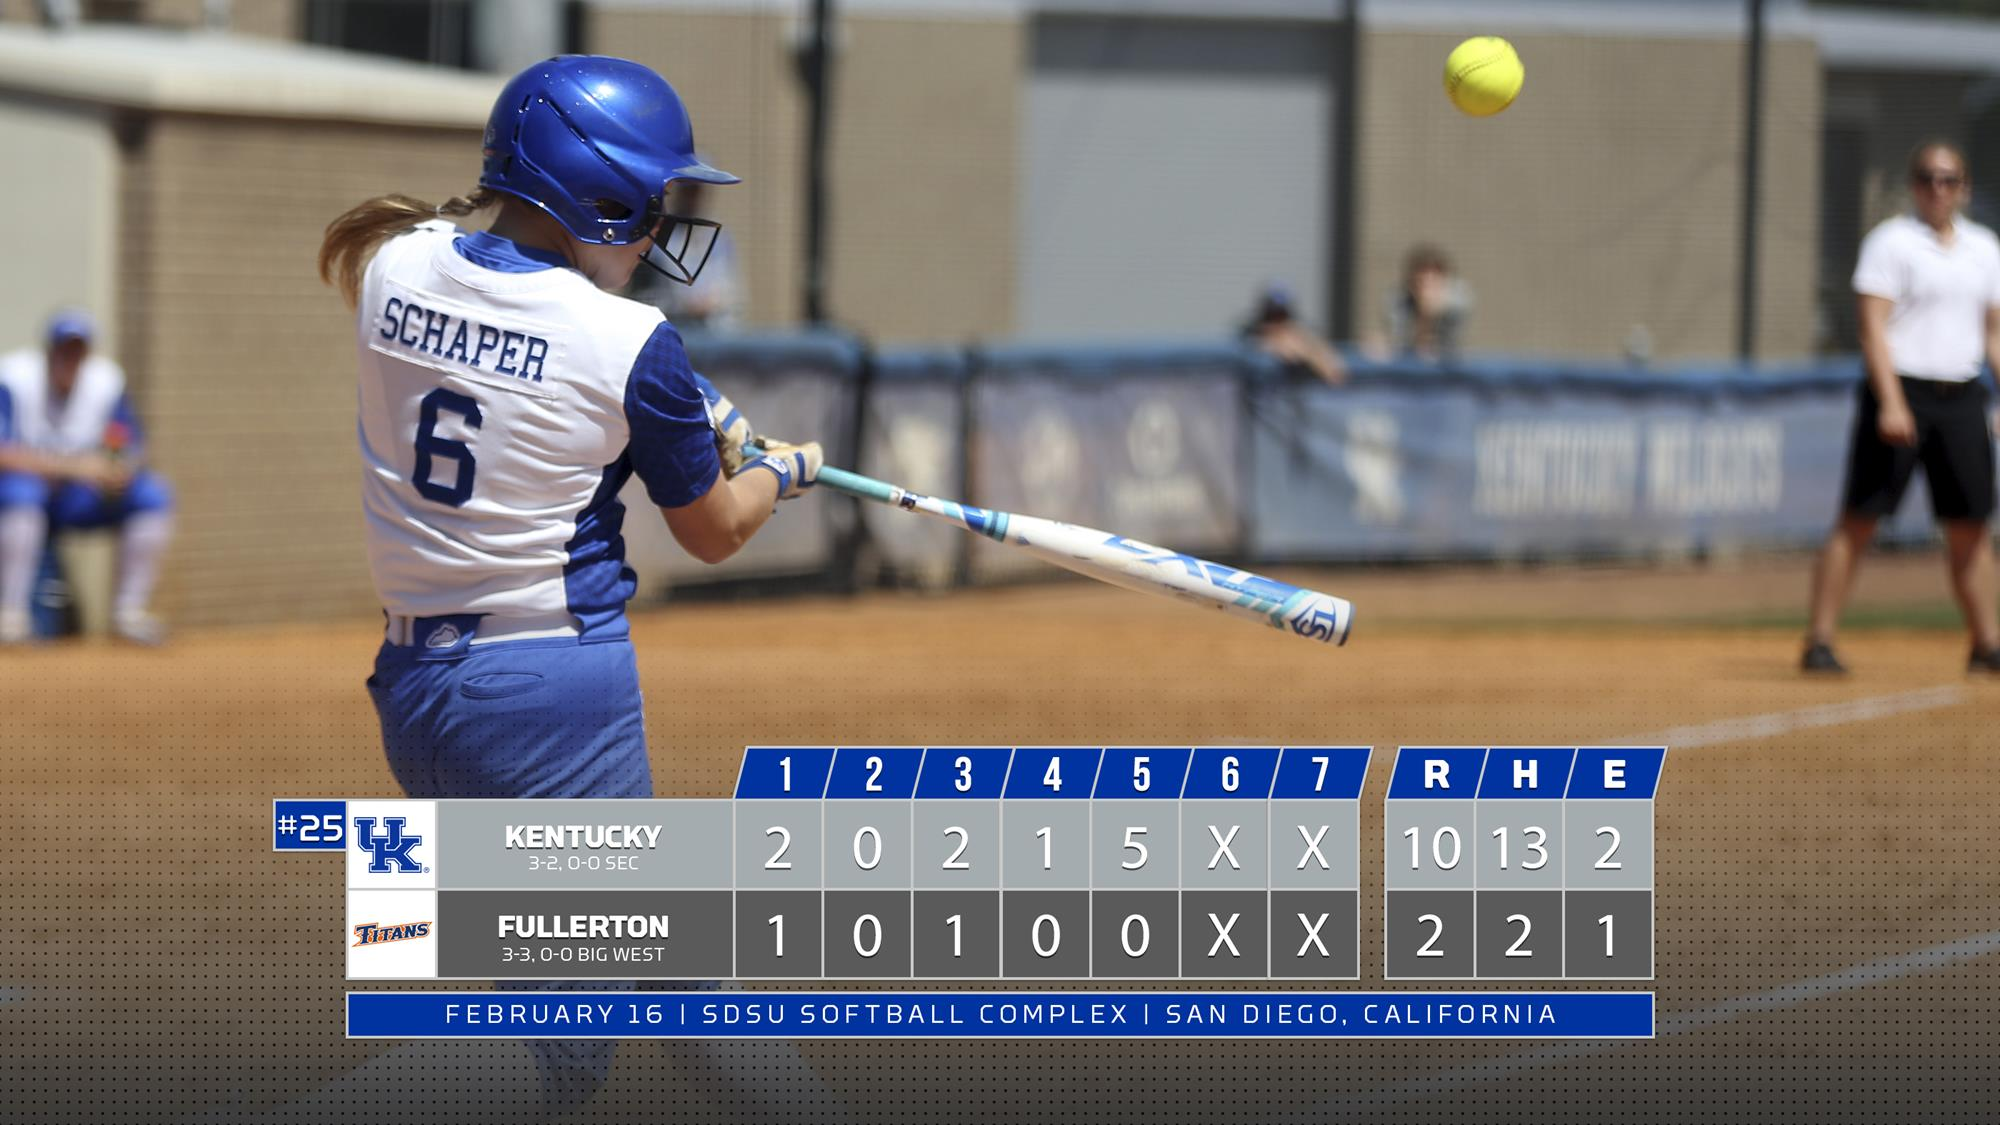 Vick’s Three Hits, Rethake’s Complete Game Sends UK to Run-Rule Win